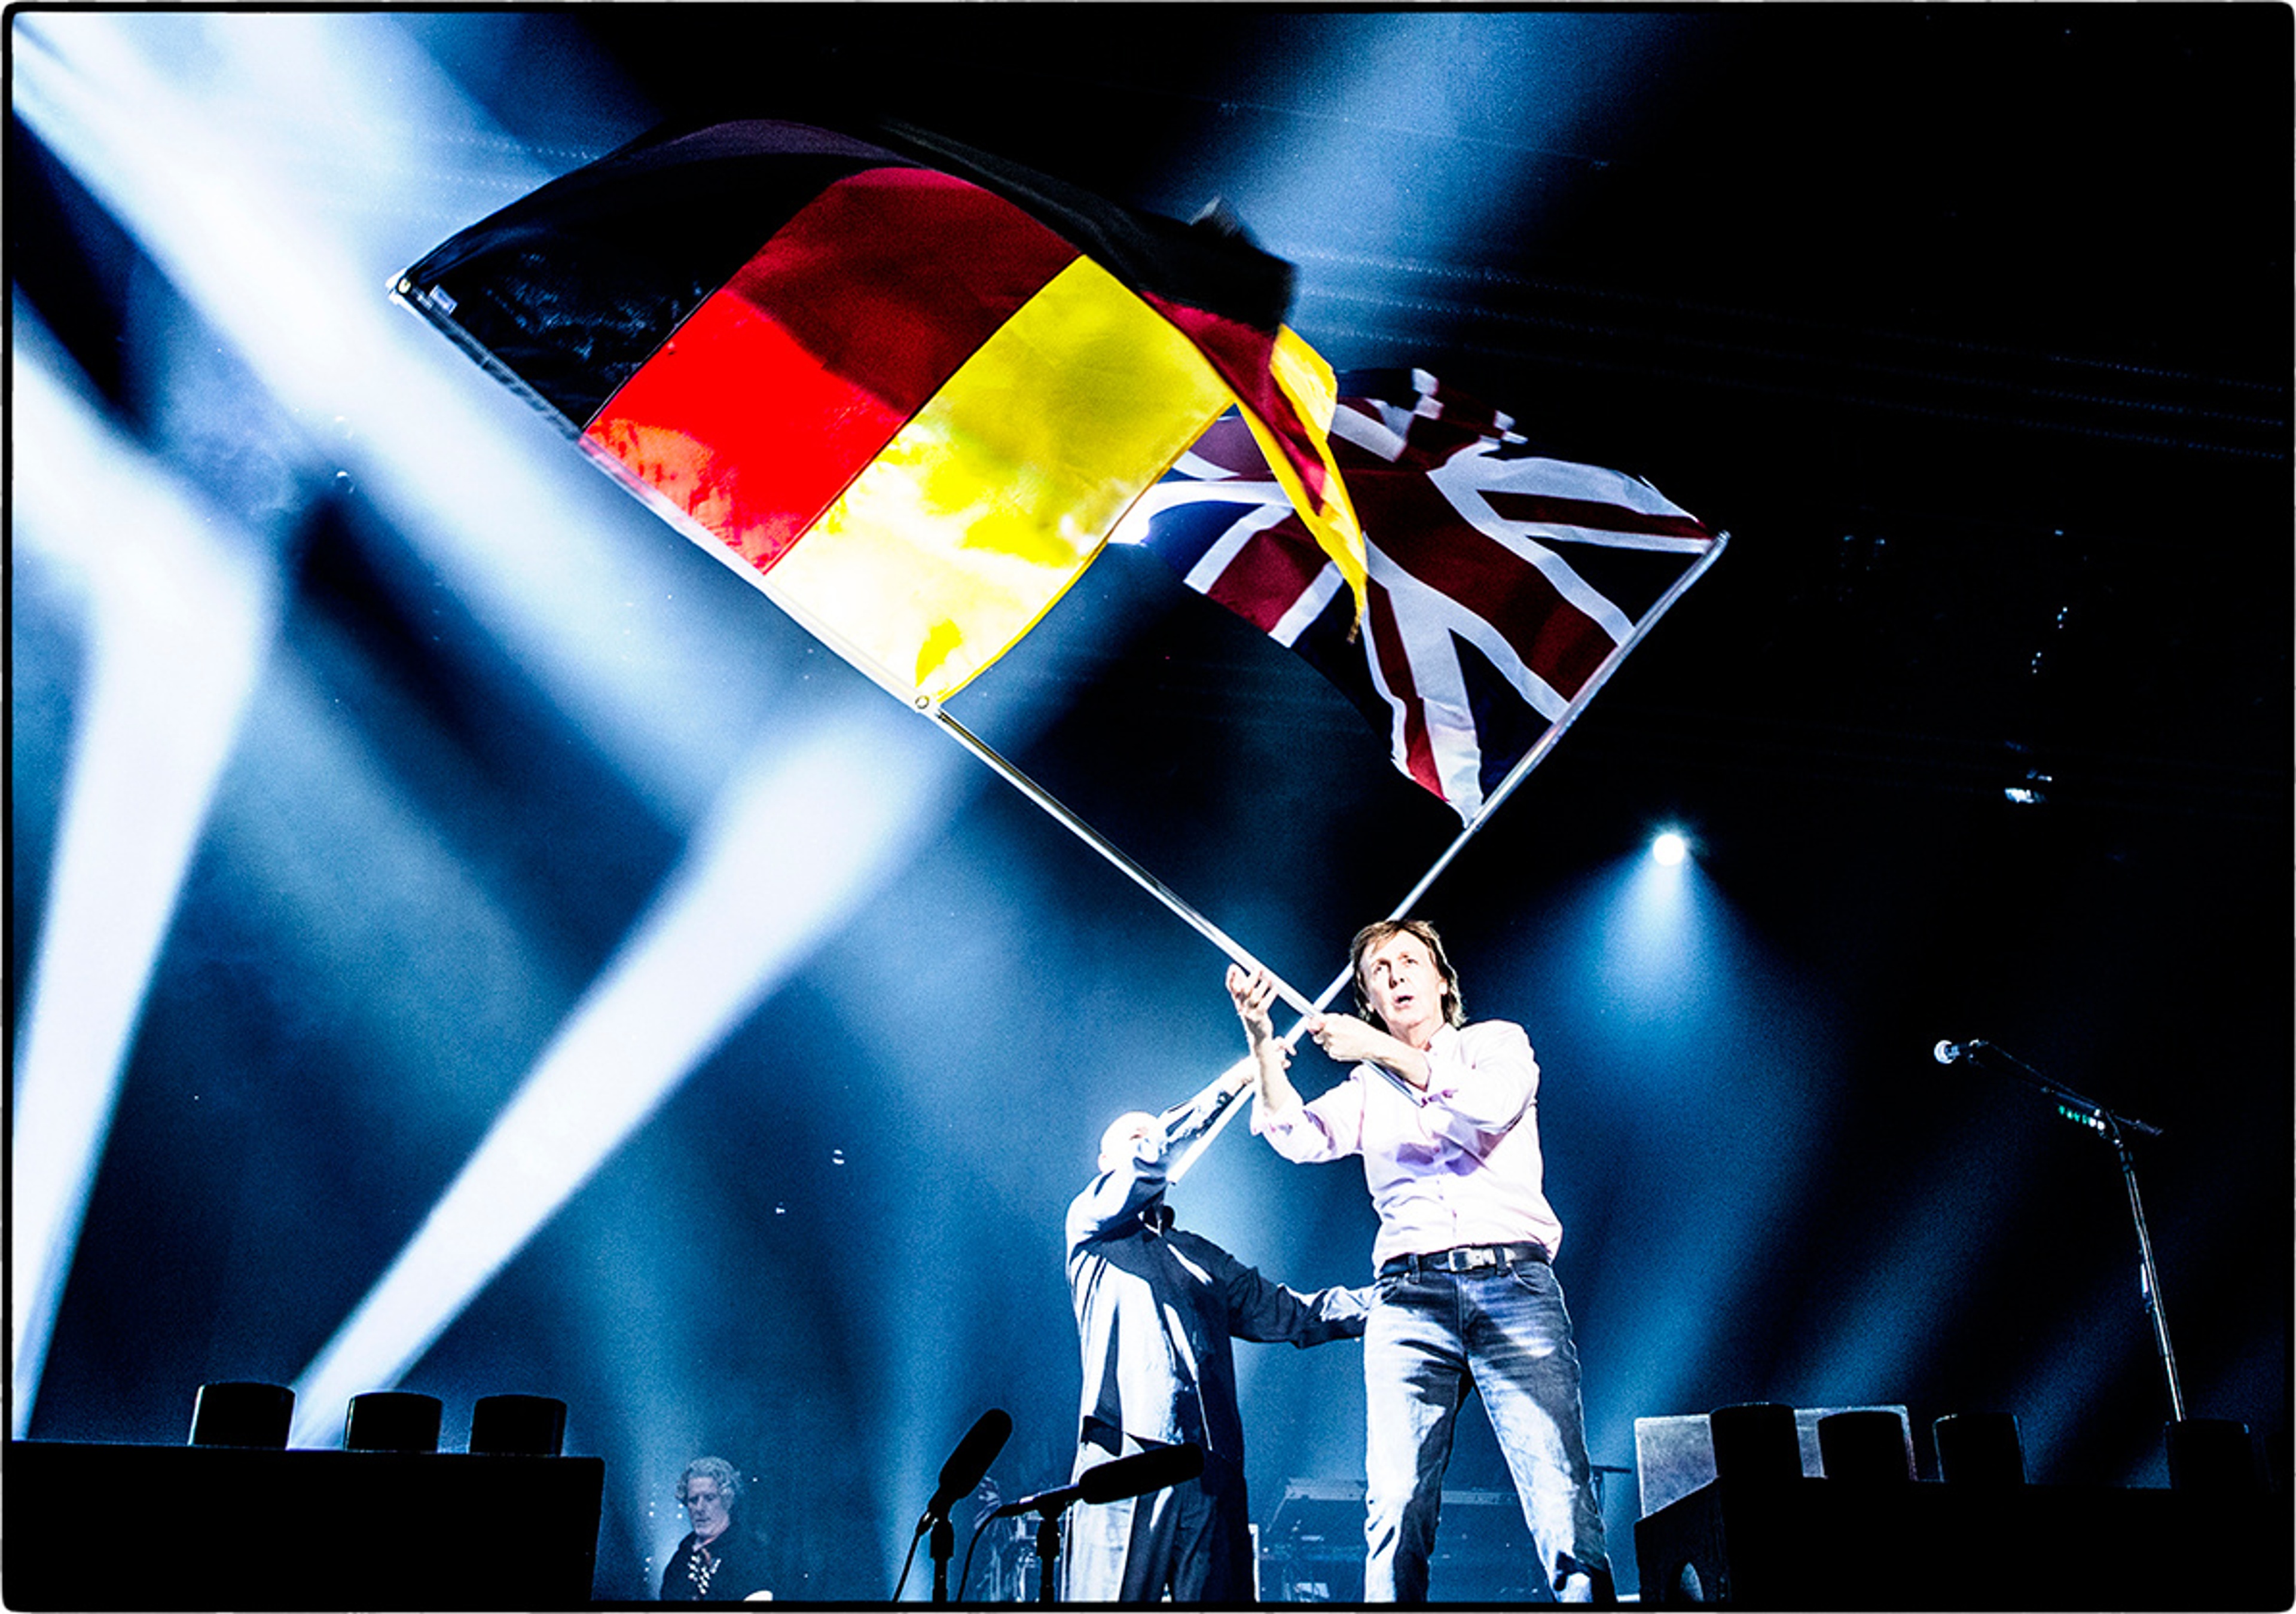 Paul takes his ‪'One On One'‬ tour to Europe, kicking off in Düsseldorf, Germany